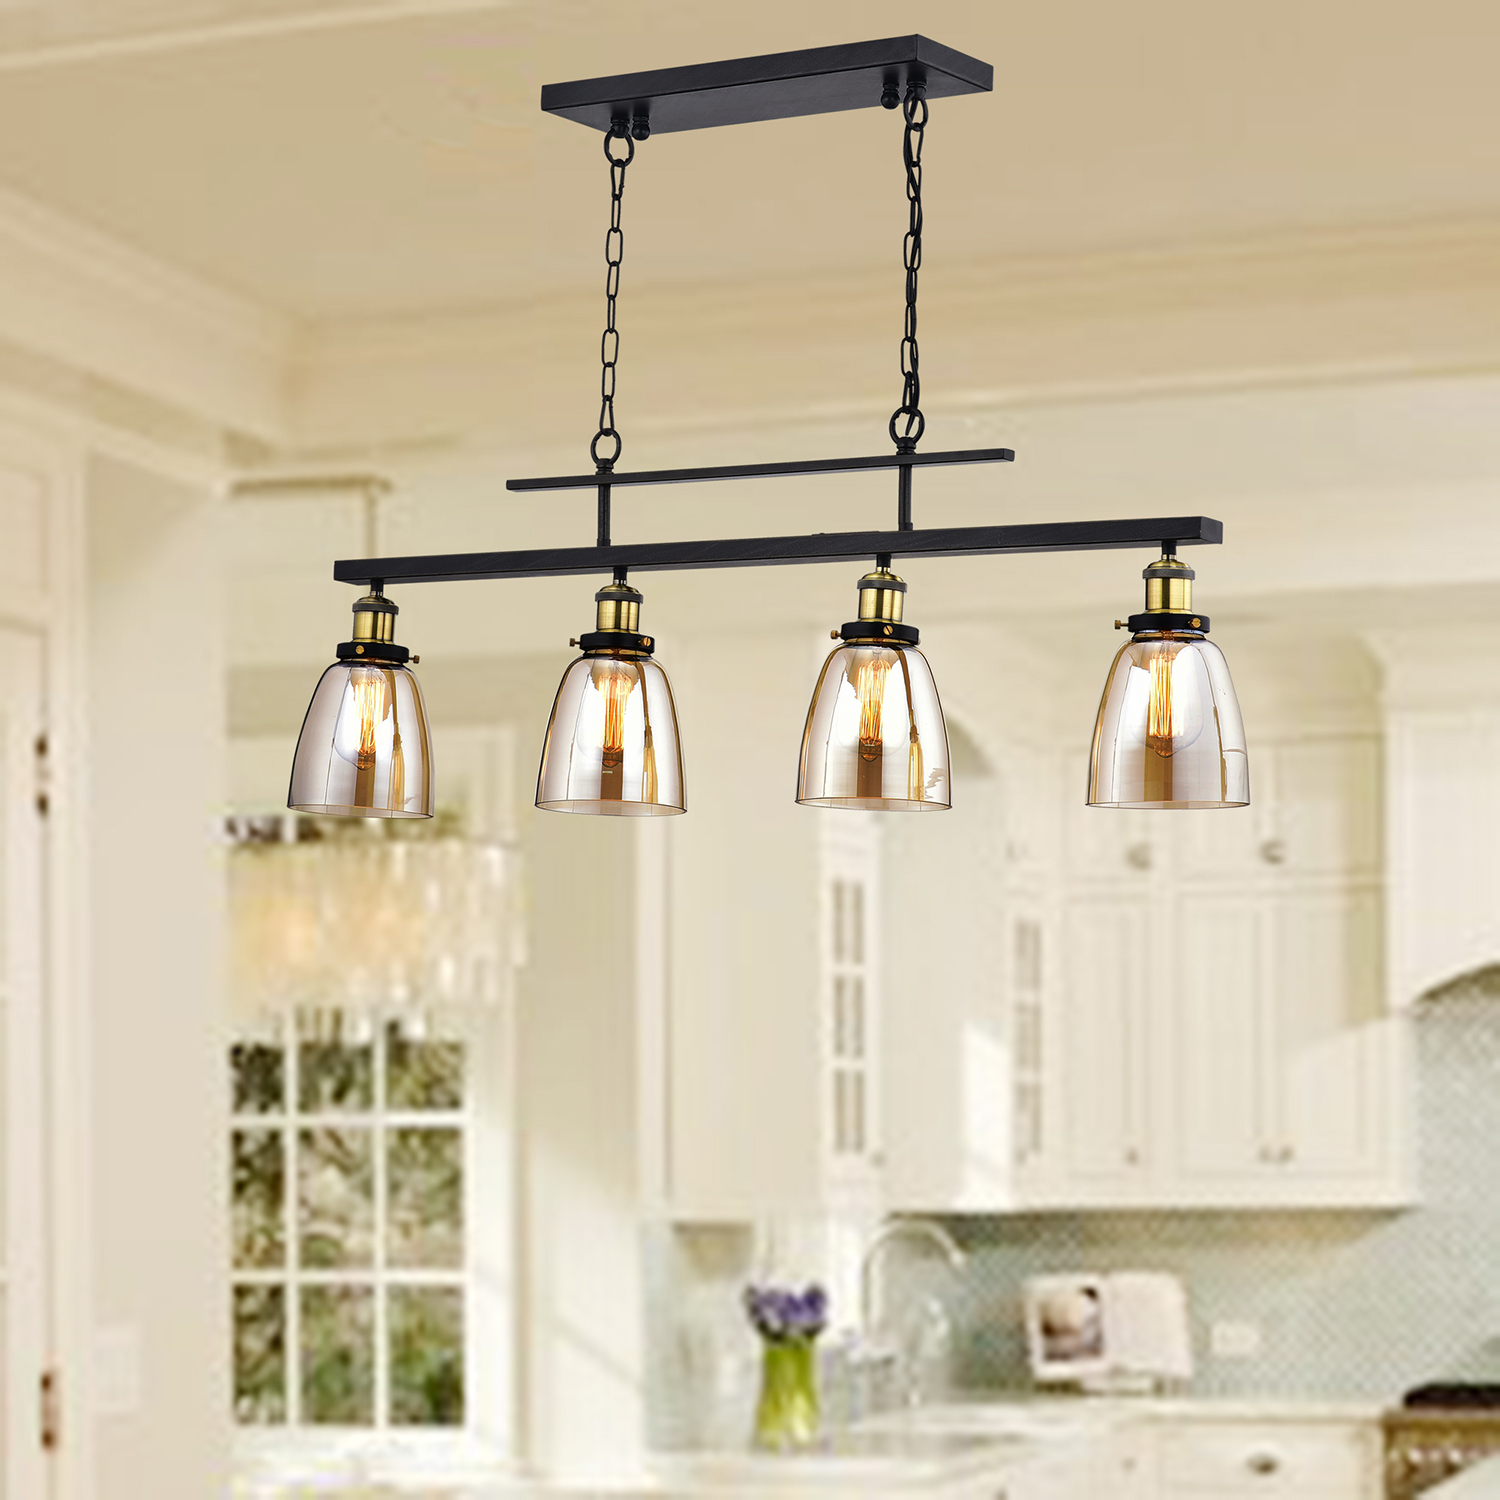 4-Light Antique Black Downlight Linear Kitchen Chandelier with Amber ...